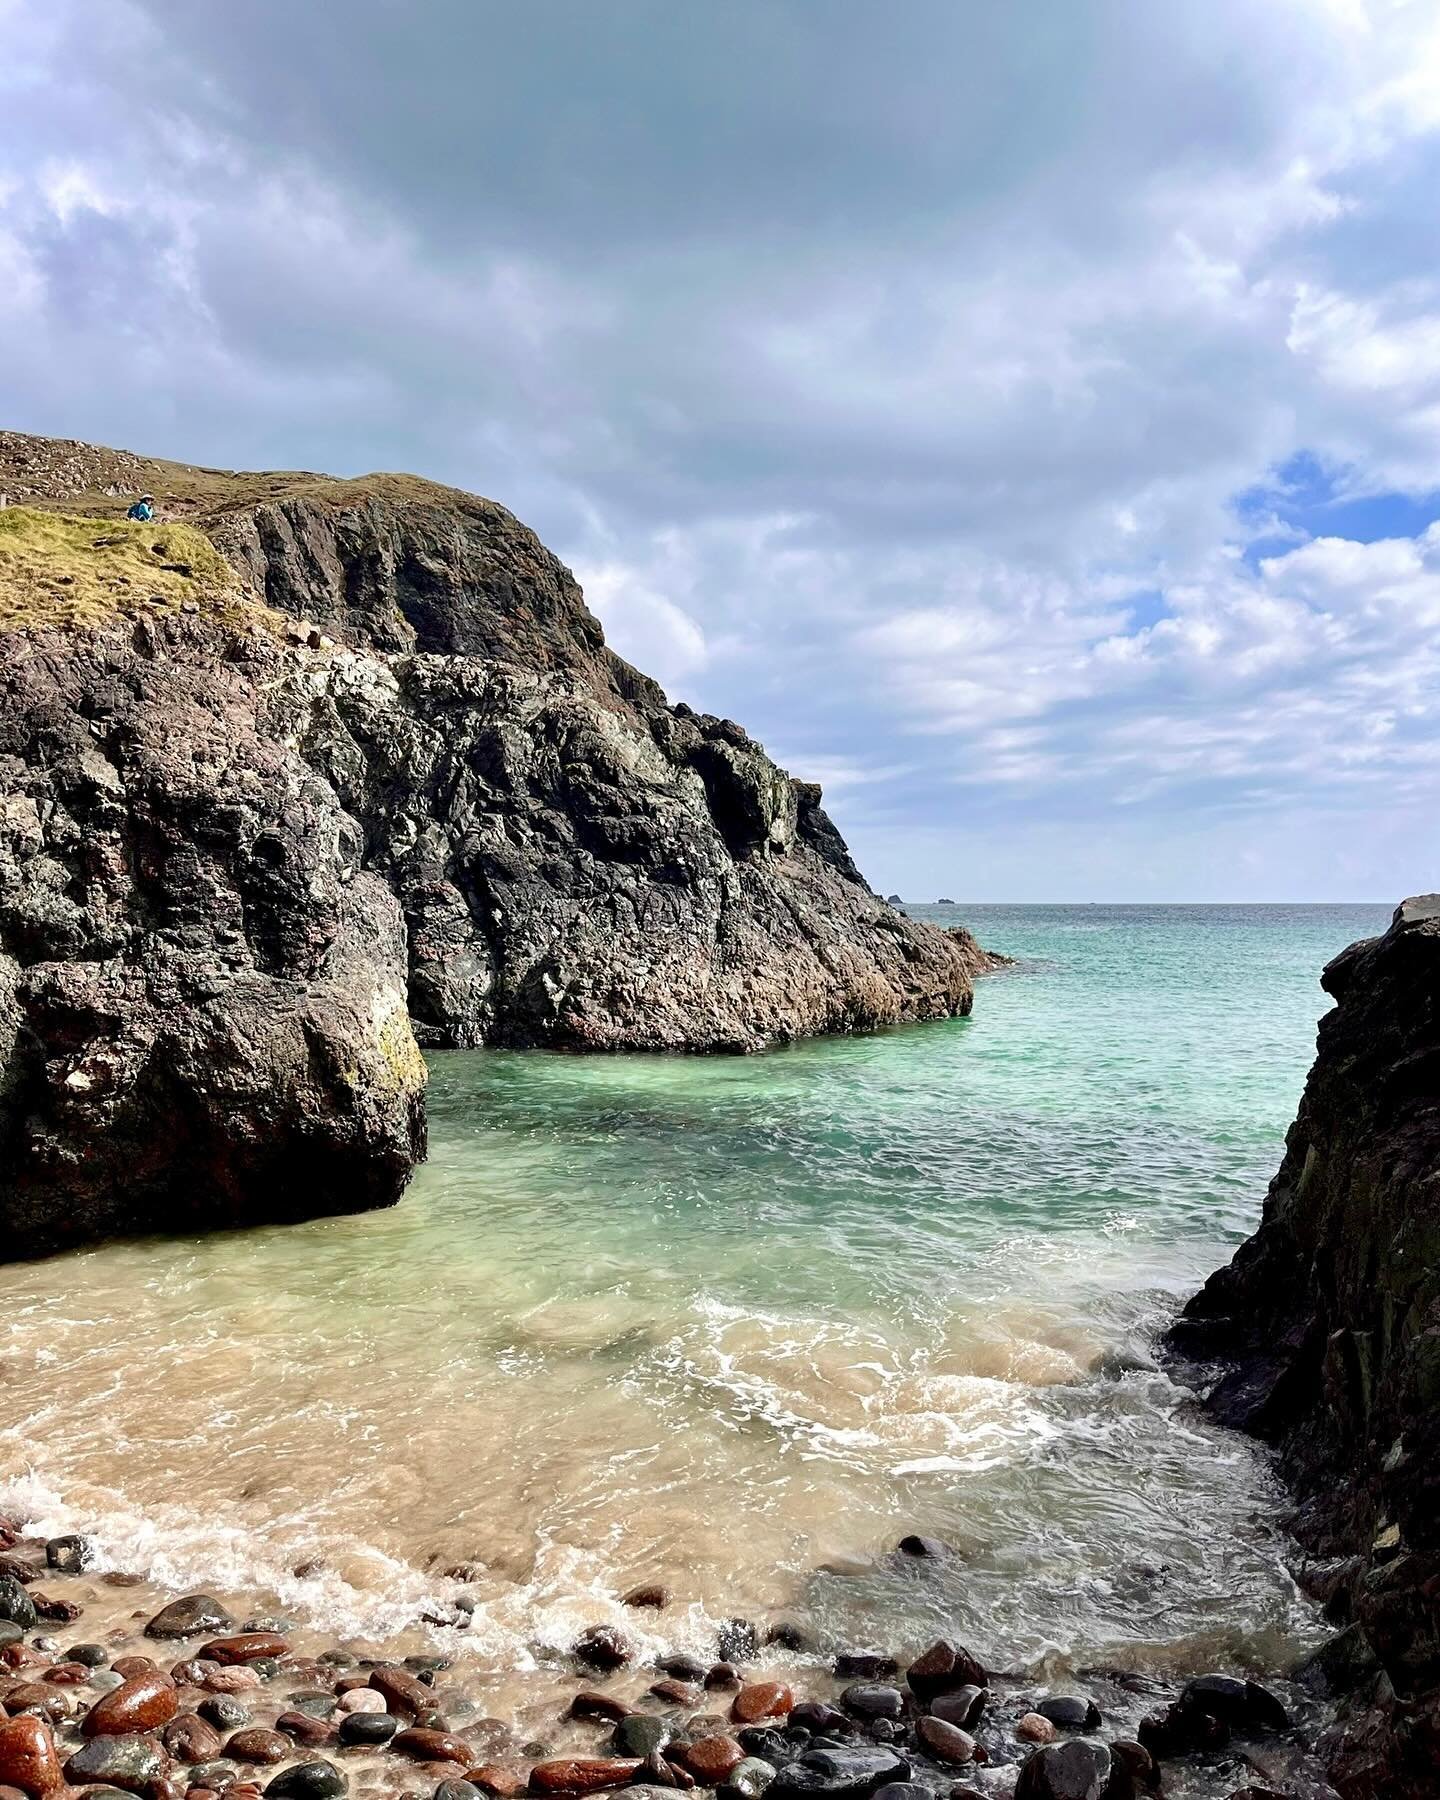 Turquoise sea, caves, rock stacks, white sand and plastic waste. The sun peeked out a few times at Kynance Cove. I need to remember my swimming stuff the time I visit, most likely this week. 🐠
Now, I&rsquo;m ready to gooooooo! #kynancecove

#lizardp